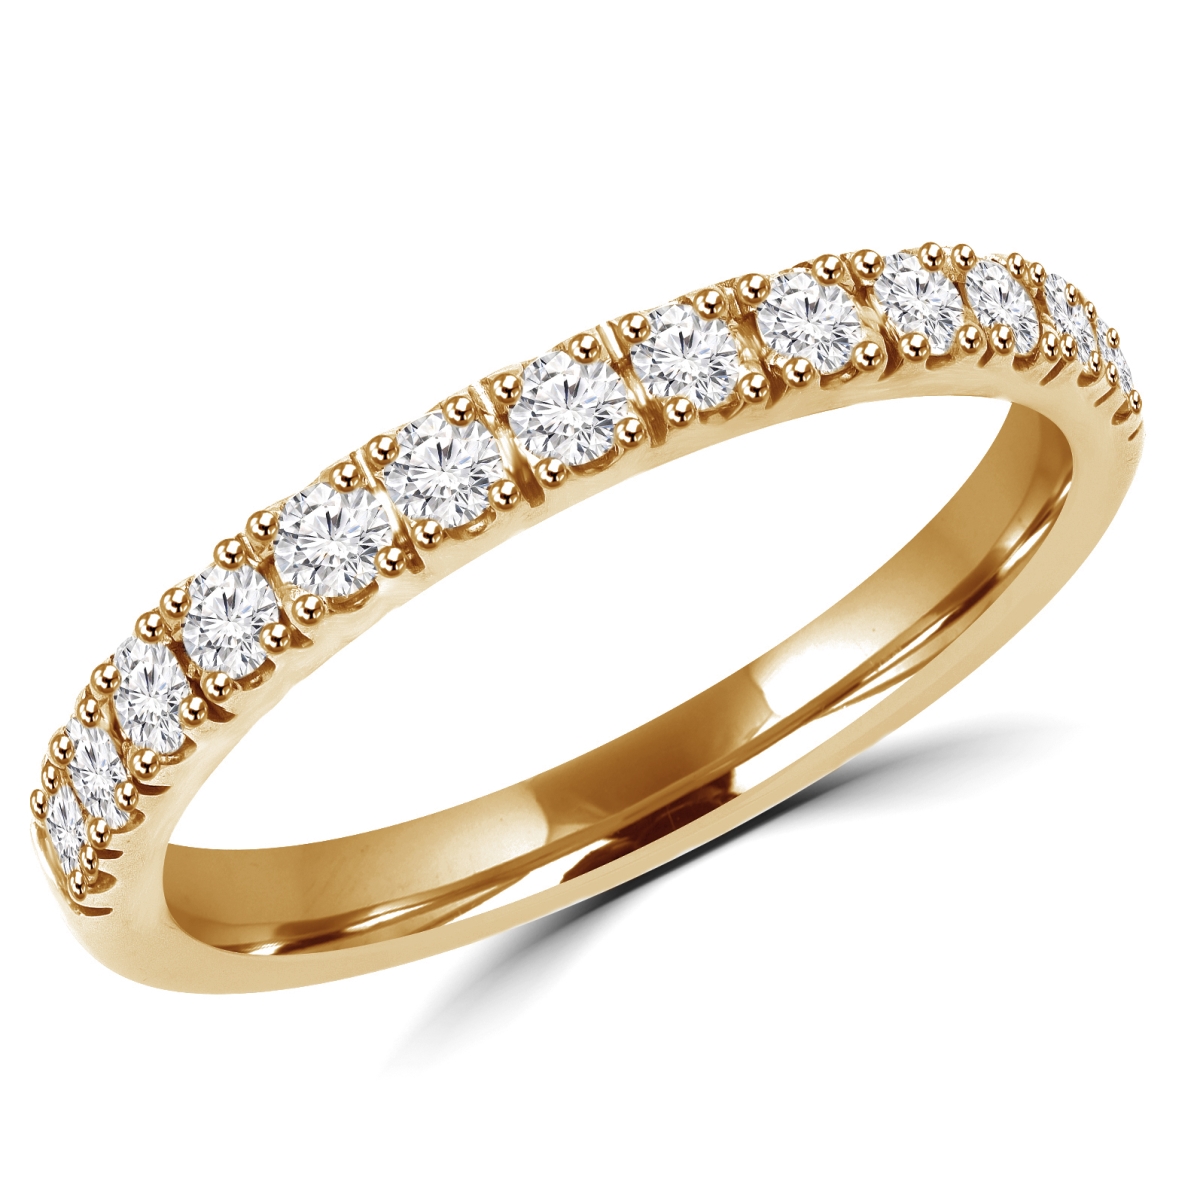 Picture of Majesty Diamonds MD180187-3.5 0.3 CTW Round Diamond Semi-Eternity Wedding Band Ring in 14K Yellow Gold - Size 3.5